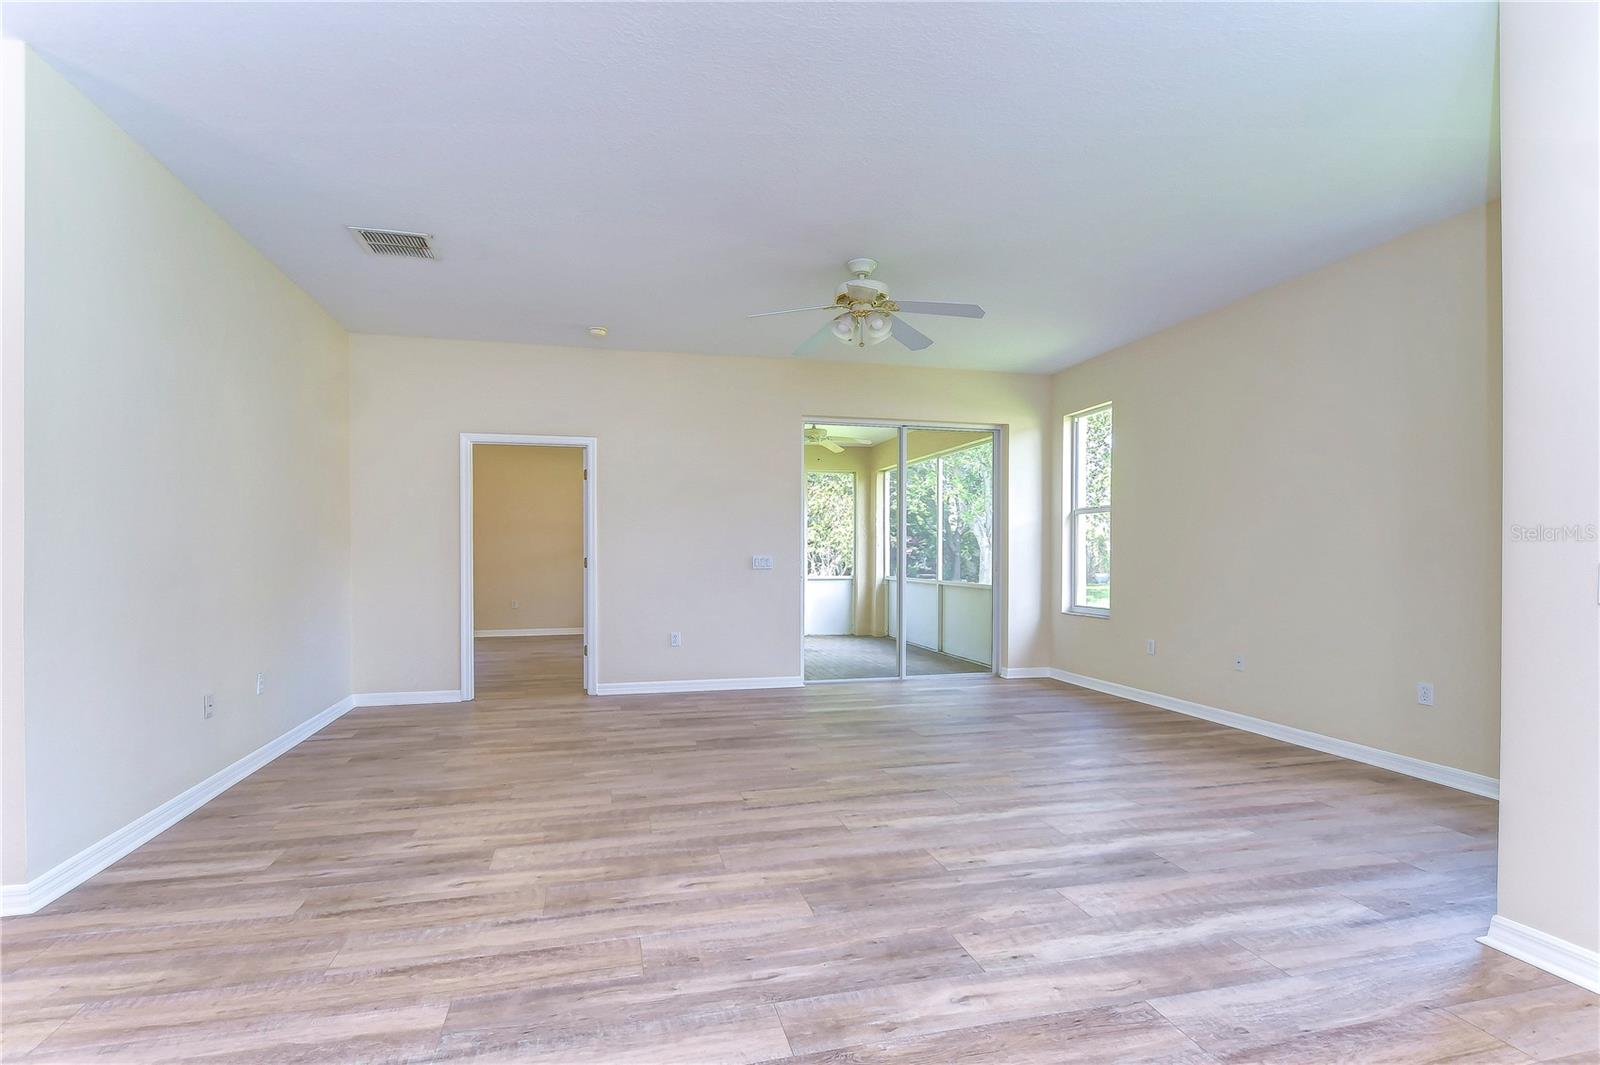 Great room offers tons of natural light!